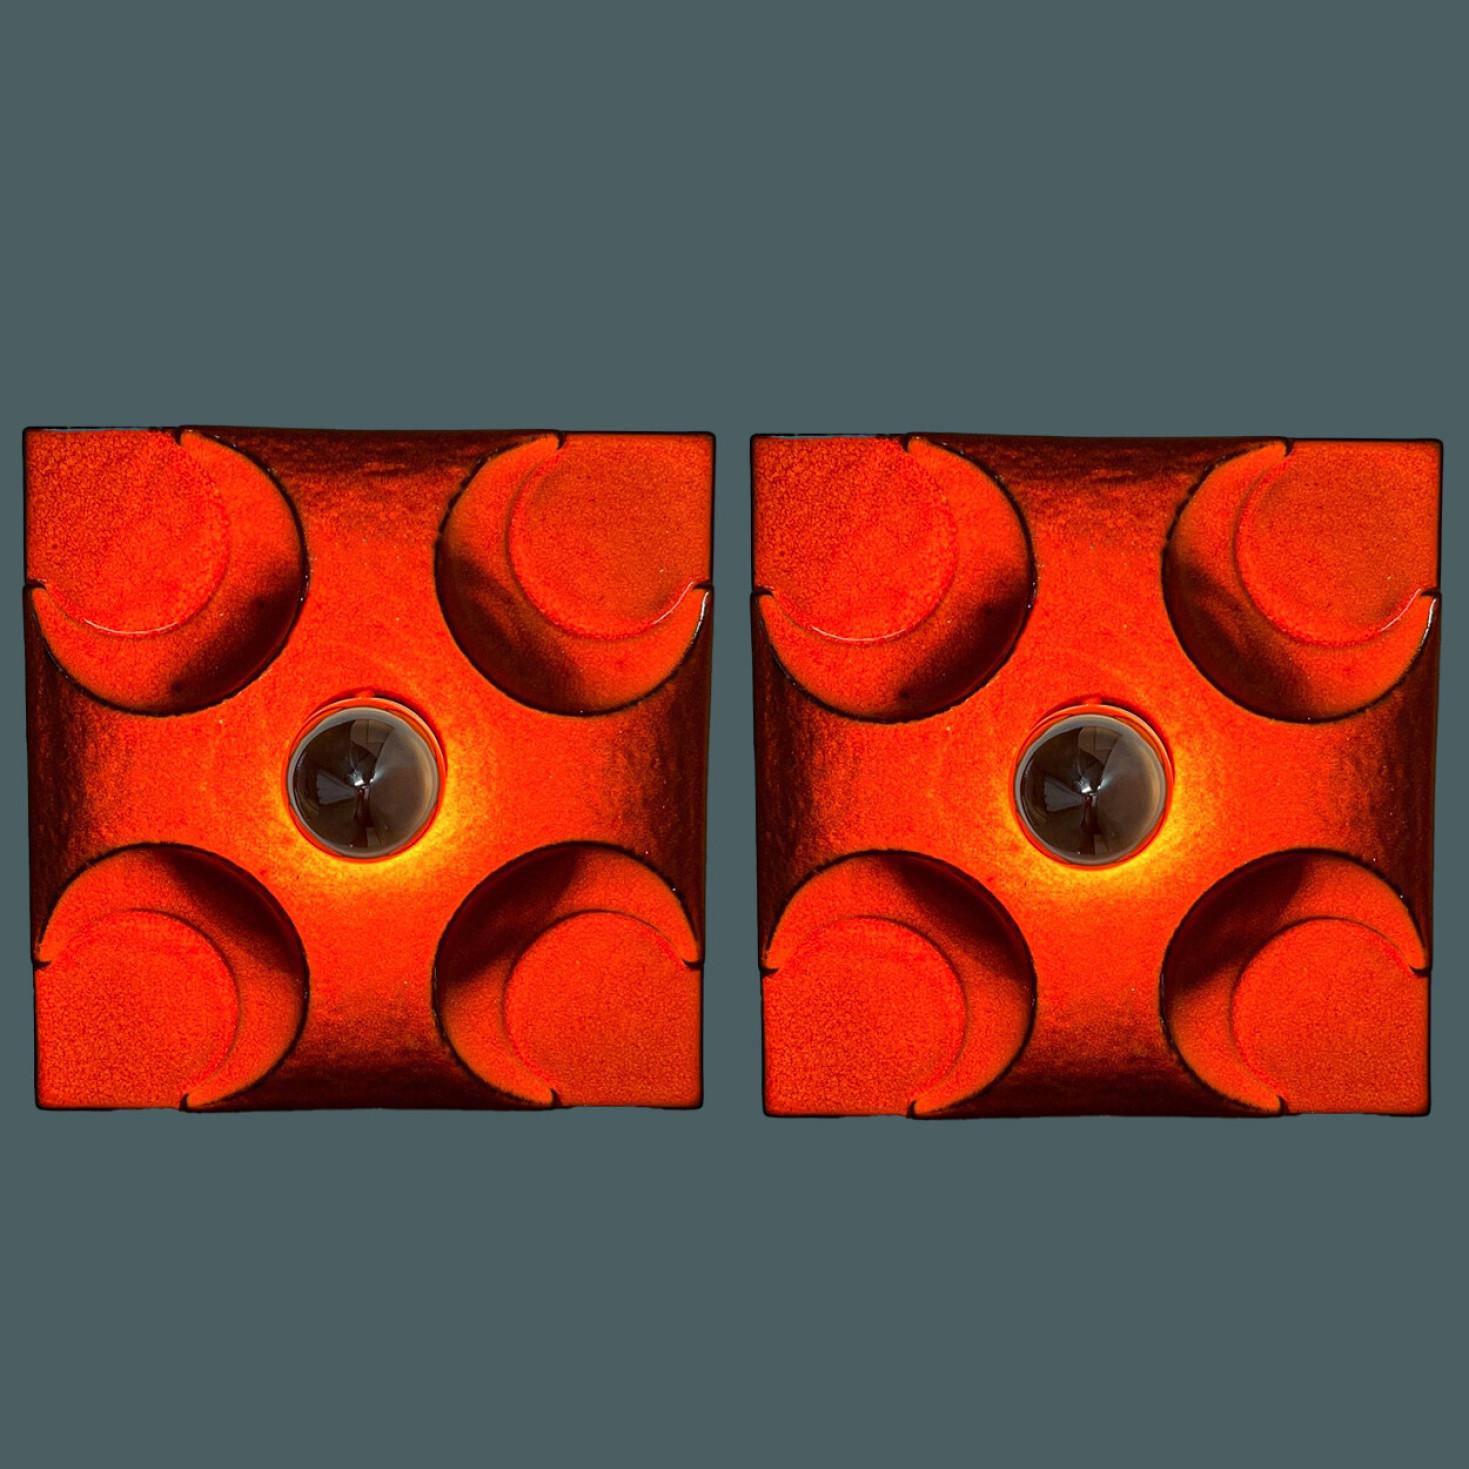 Pair of Orange Square Ceramic Wall Lights, Germany, 1970 For Sale 3